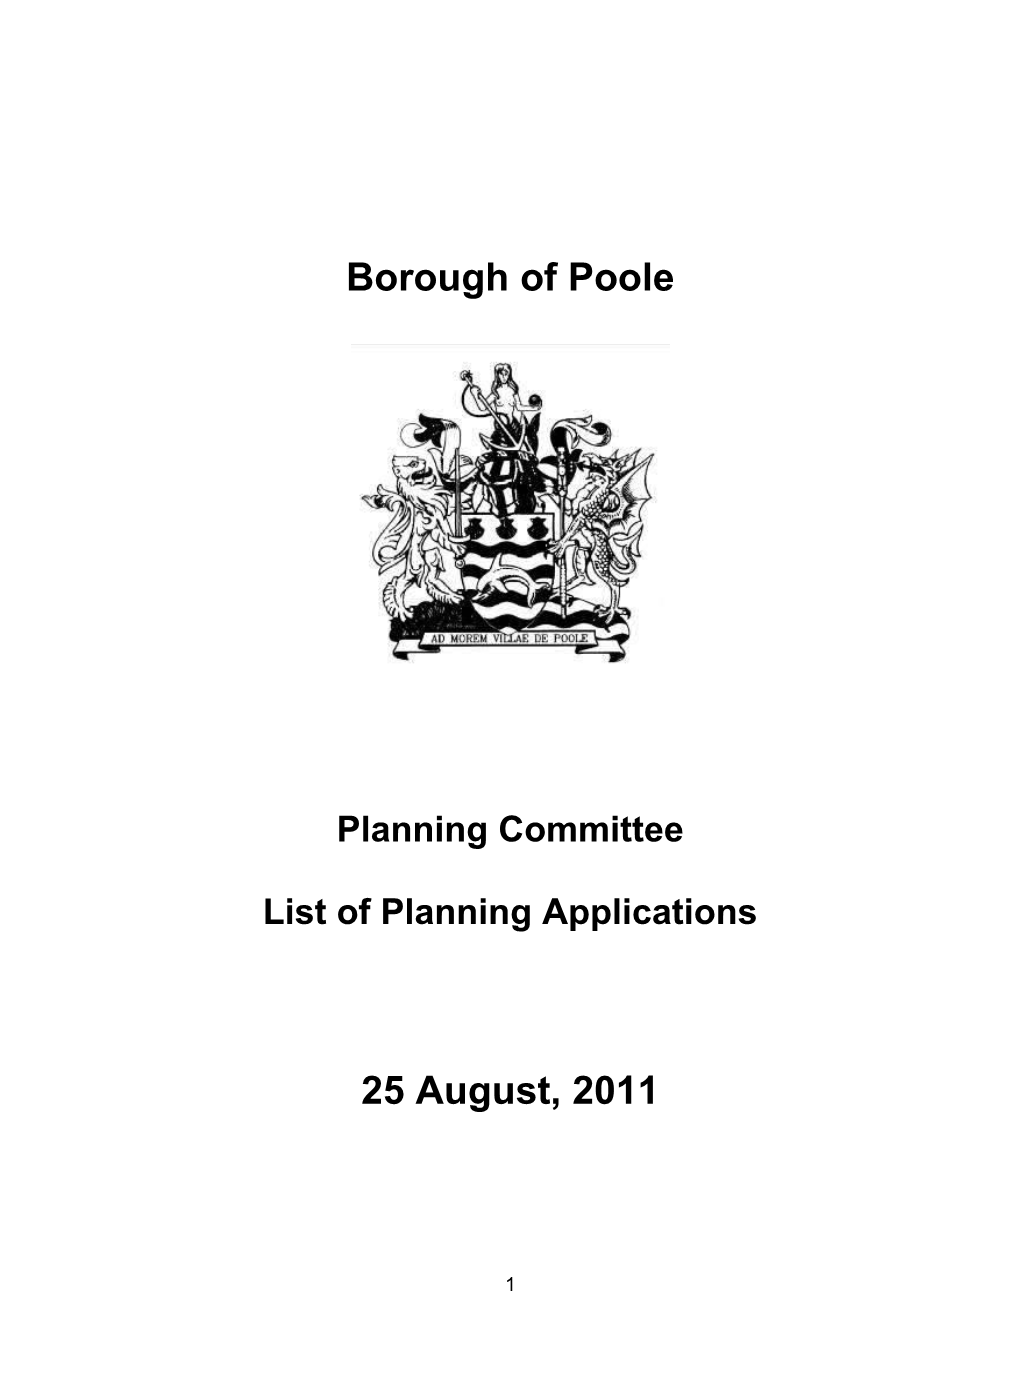 List of Planning Applications